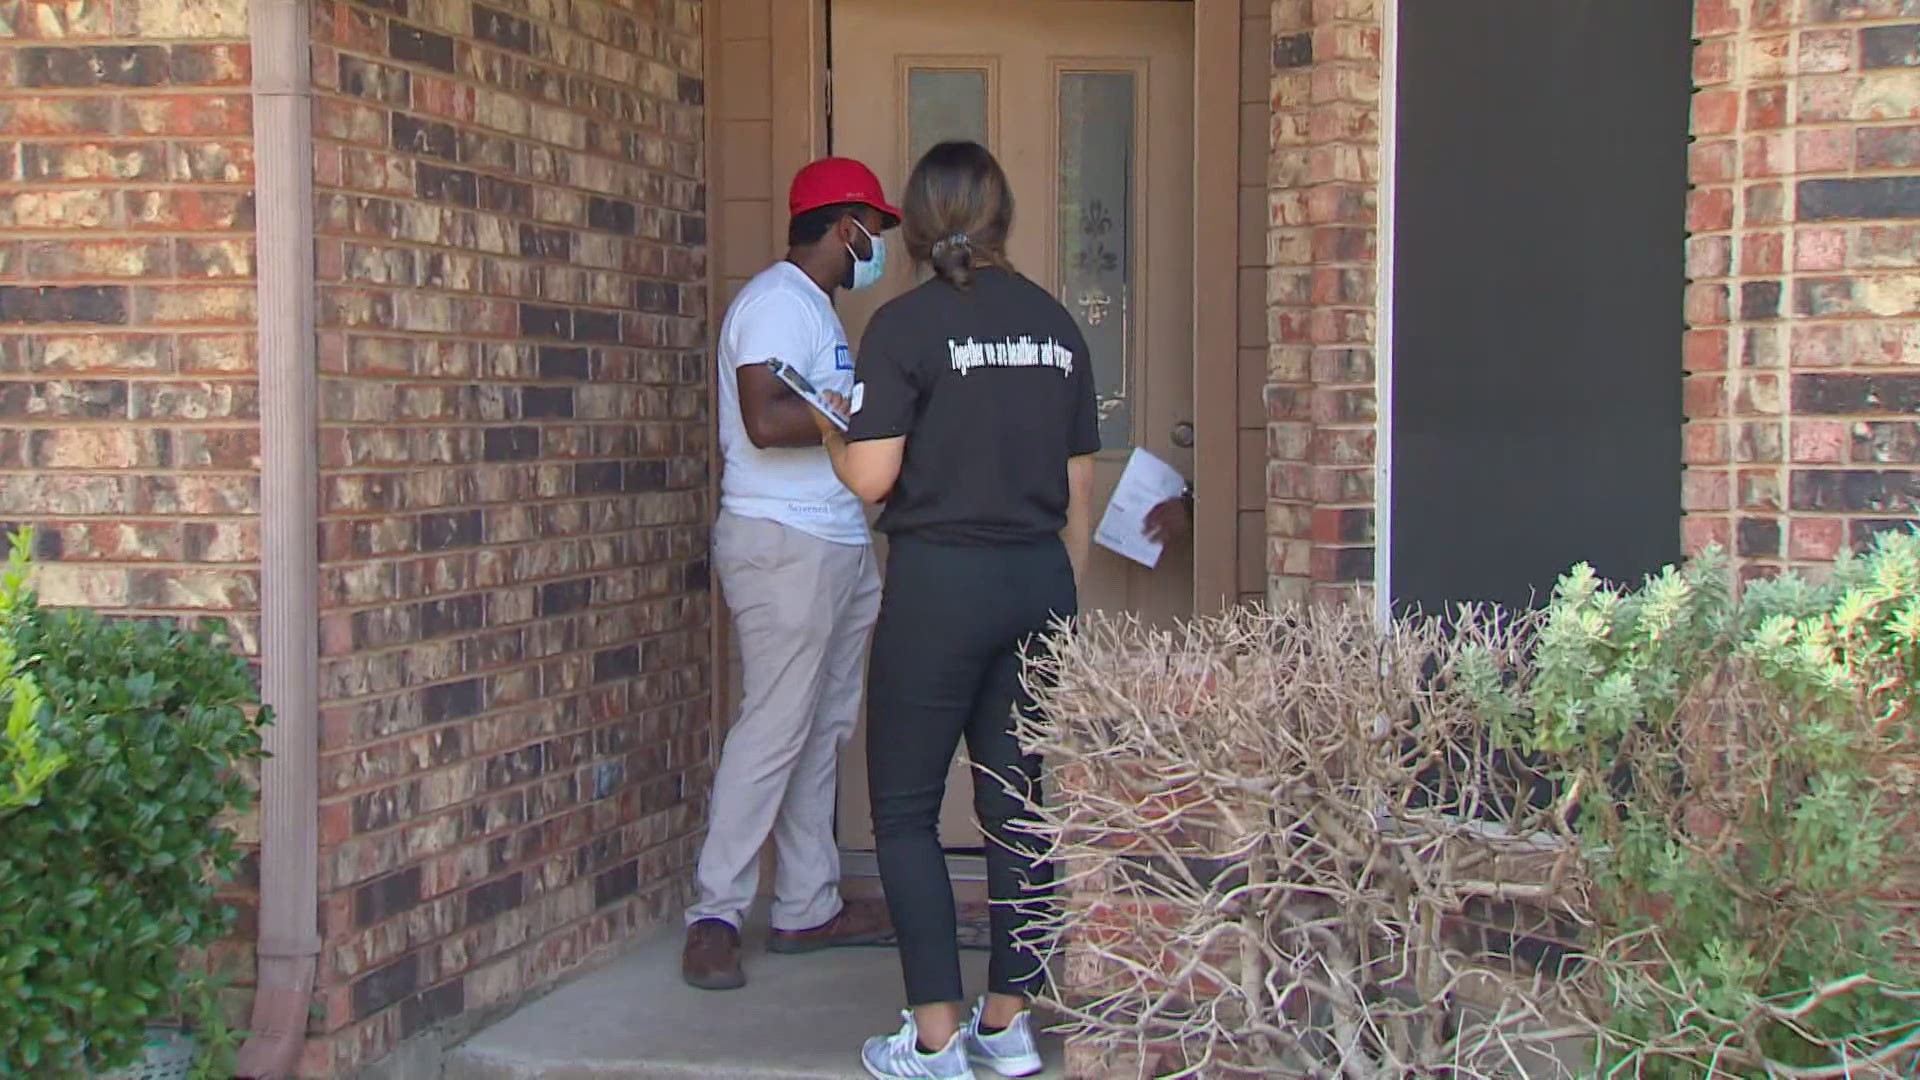 With COVID-19 cases moving in the wrong direction and the Delta variant becoming a greater concern, teams of Dallas Co. workers and volunteers are hitting the street